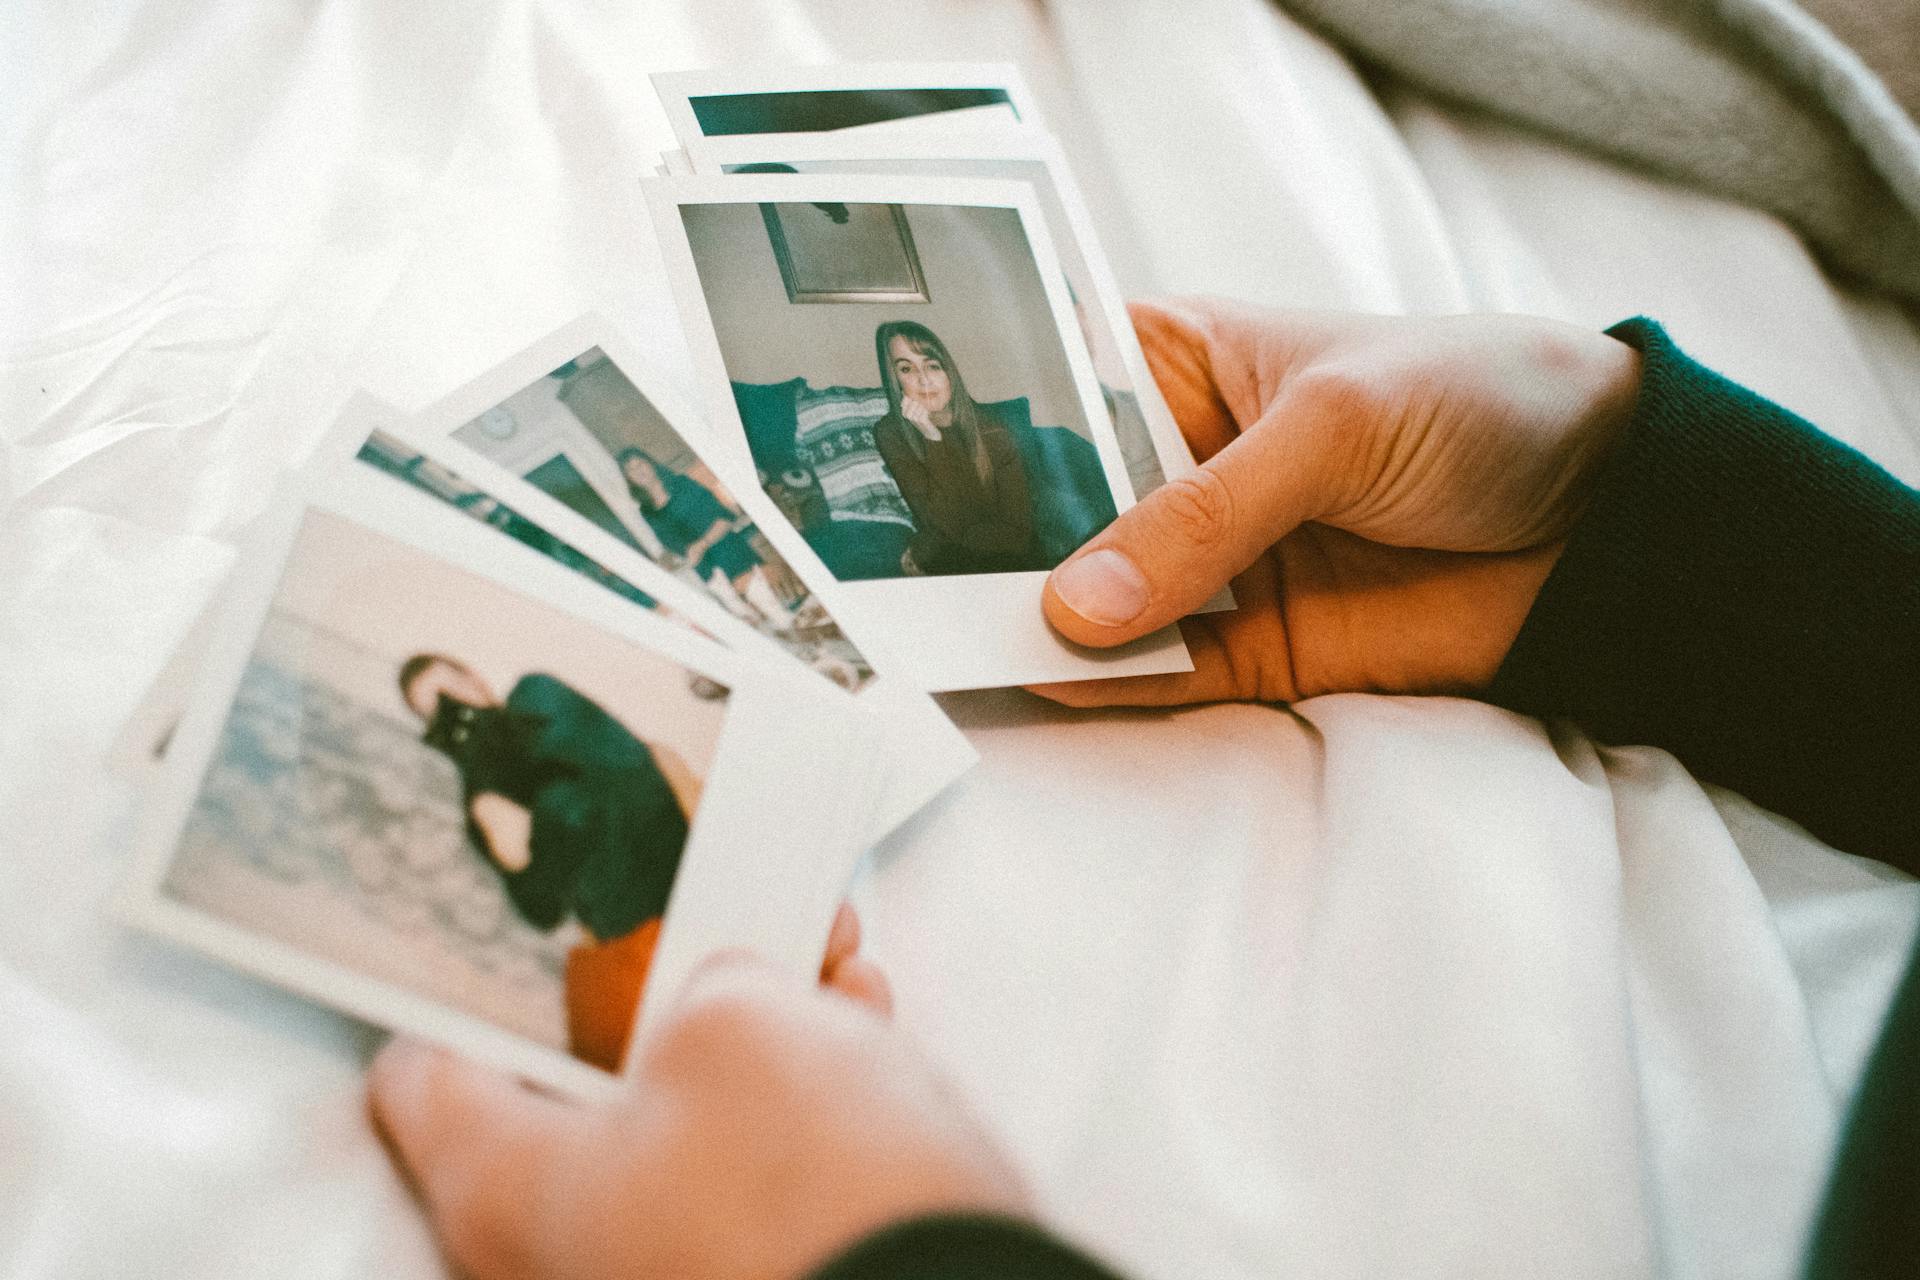 A person holding photographs | Source: Pexels